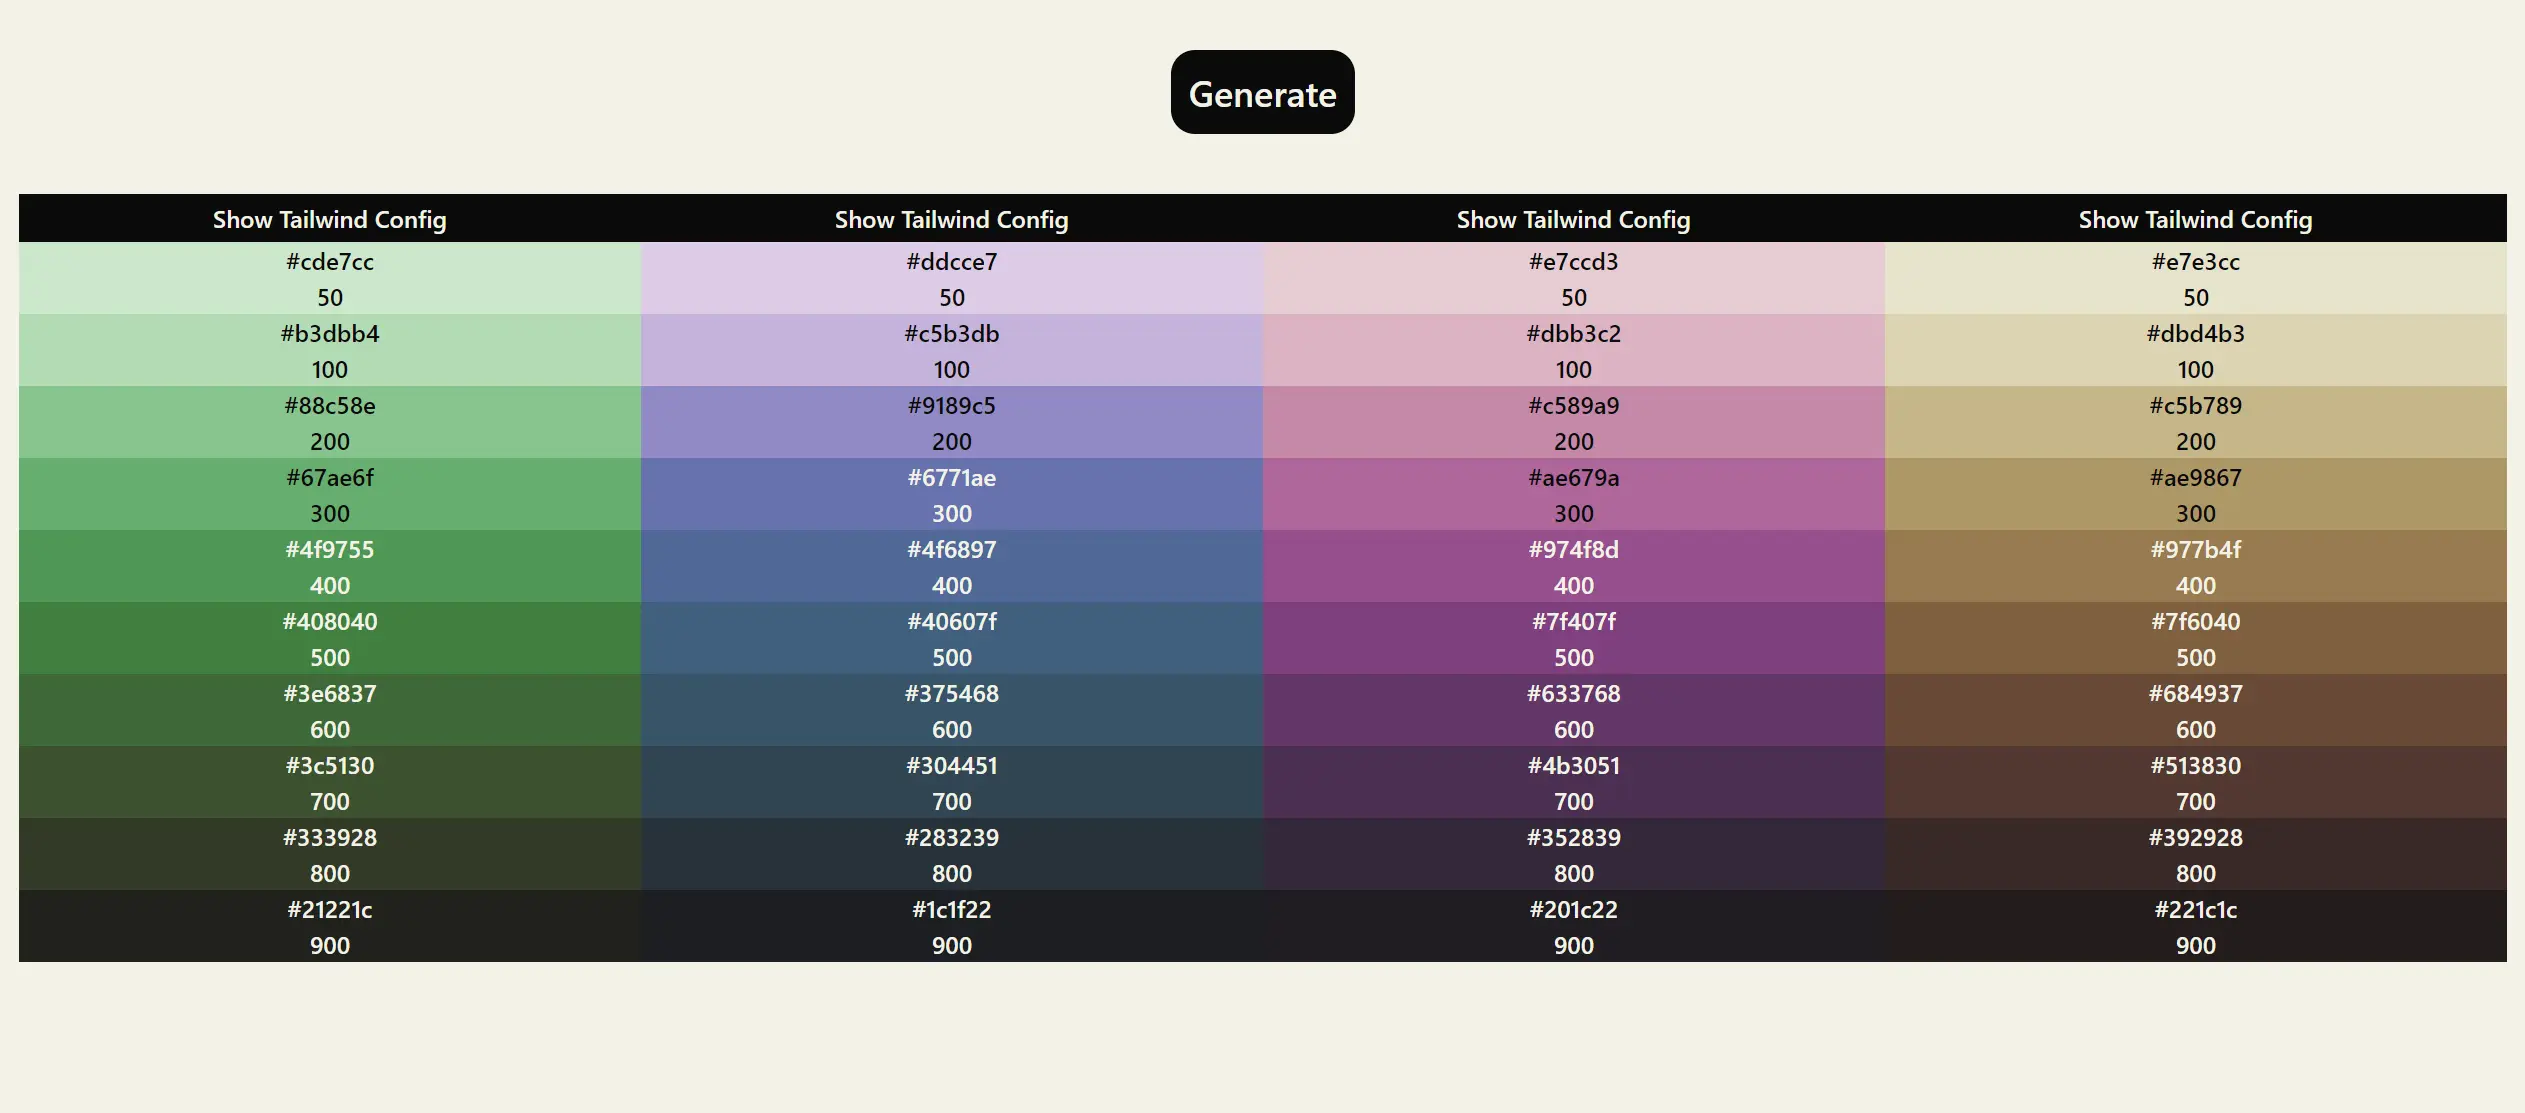 The generated color palette